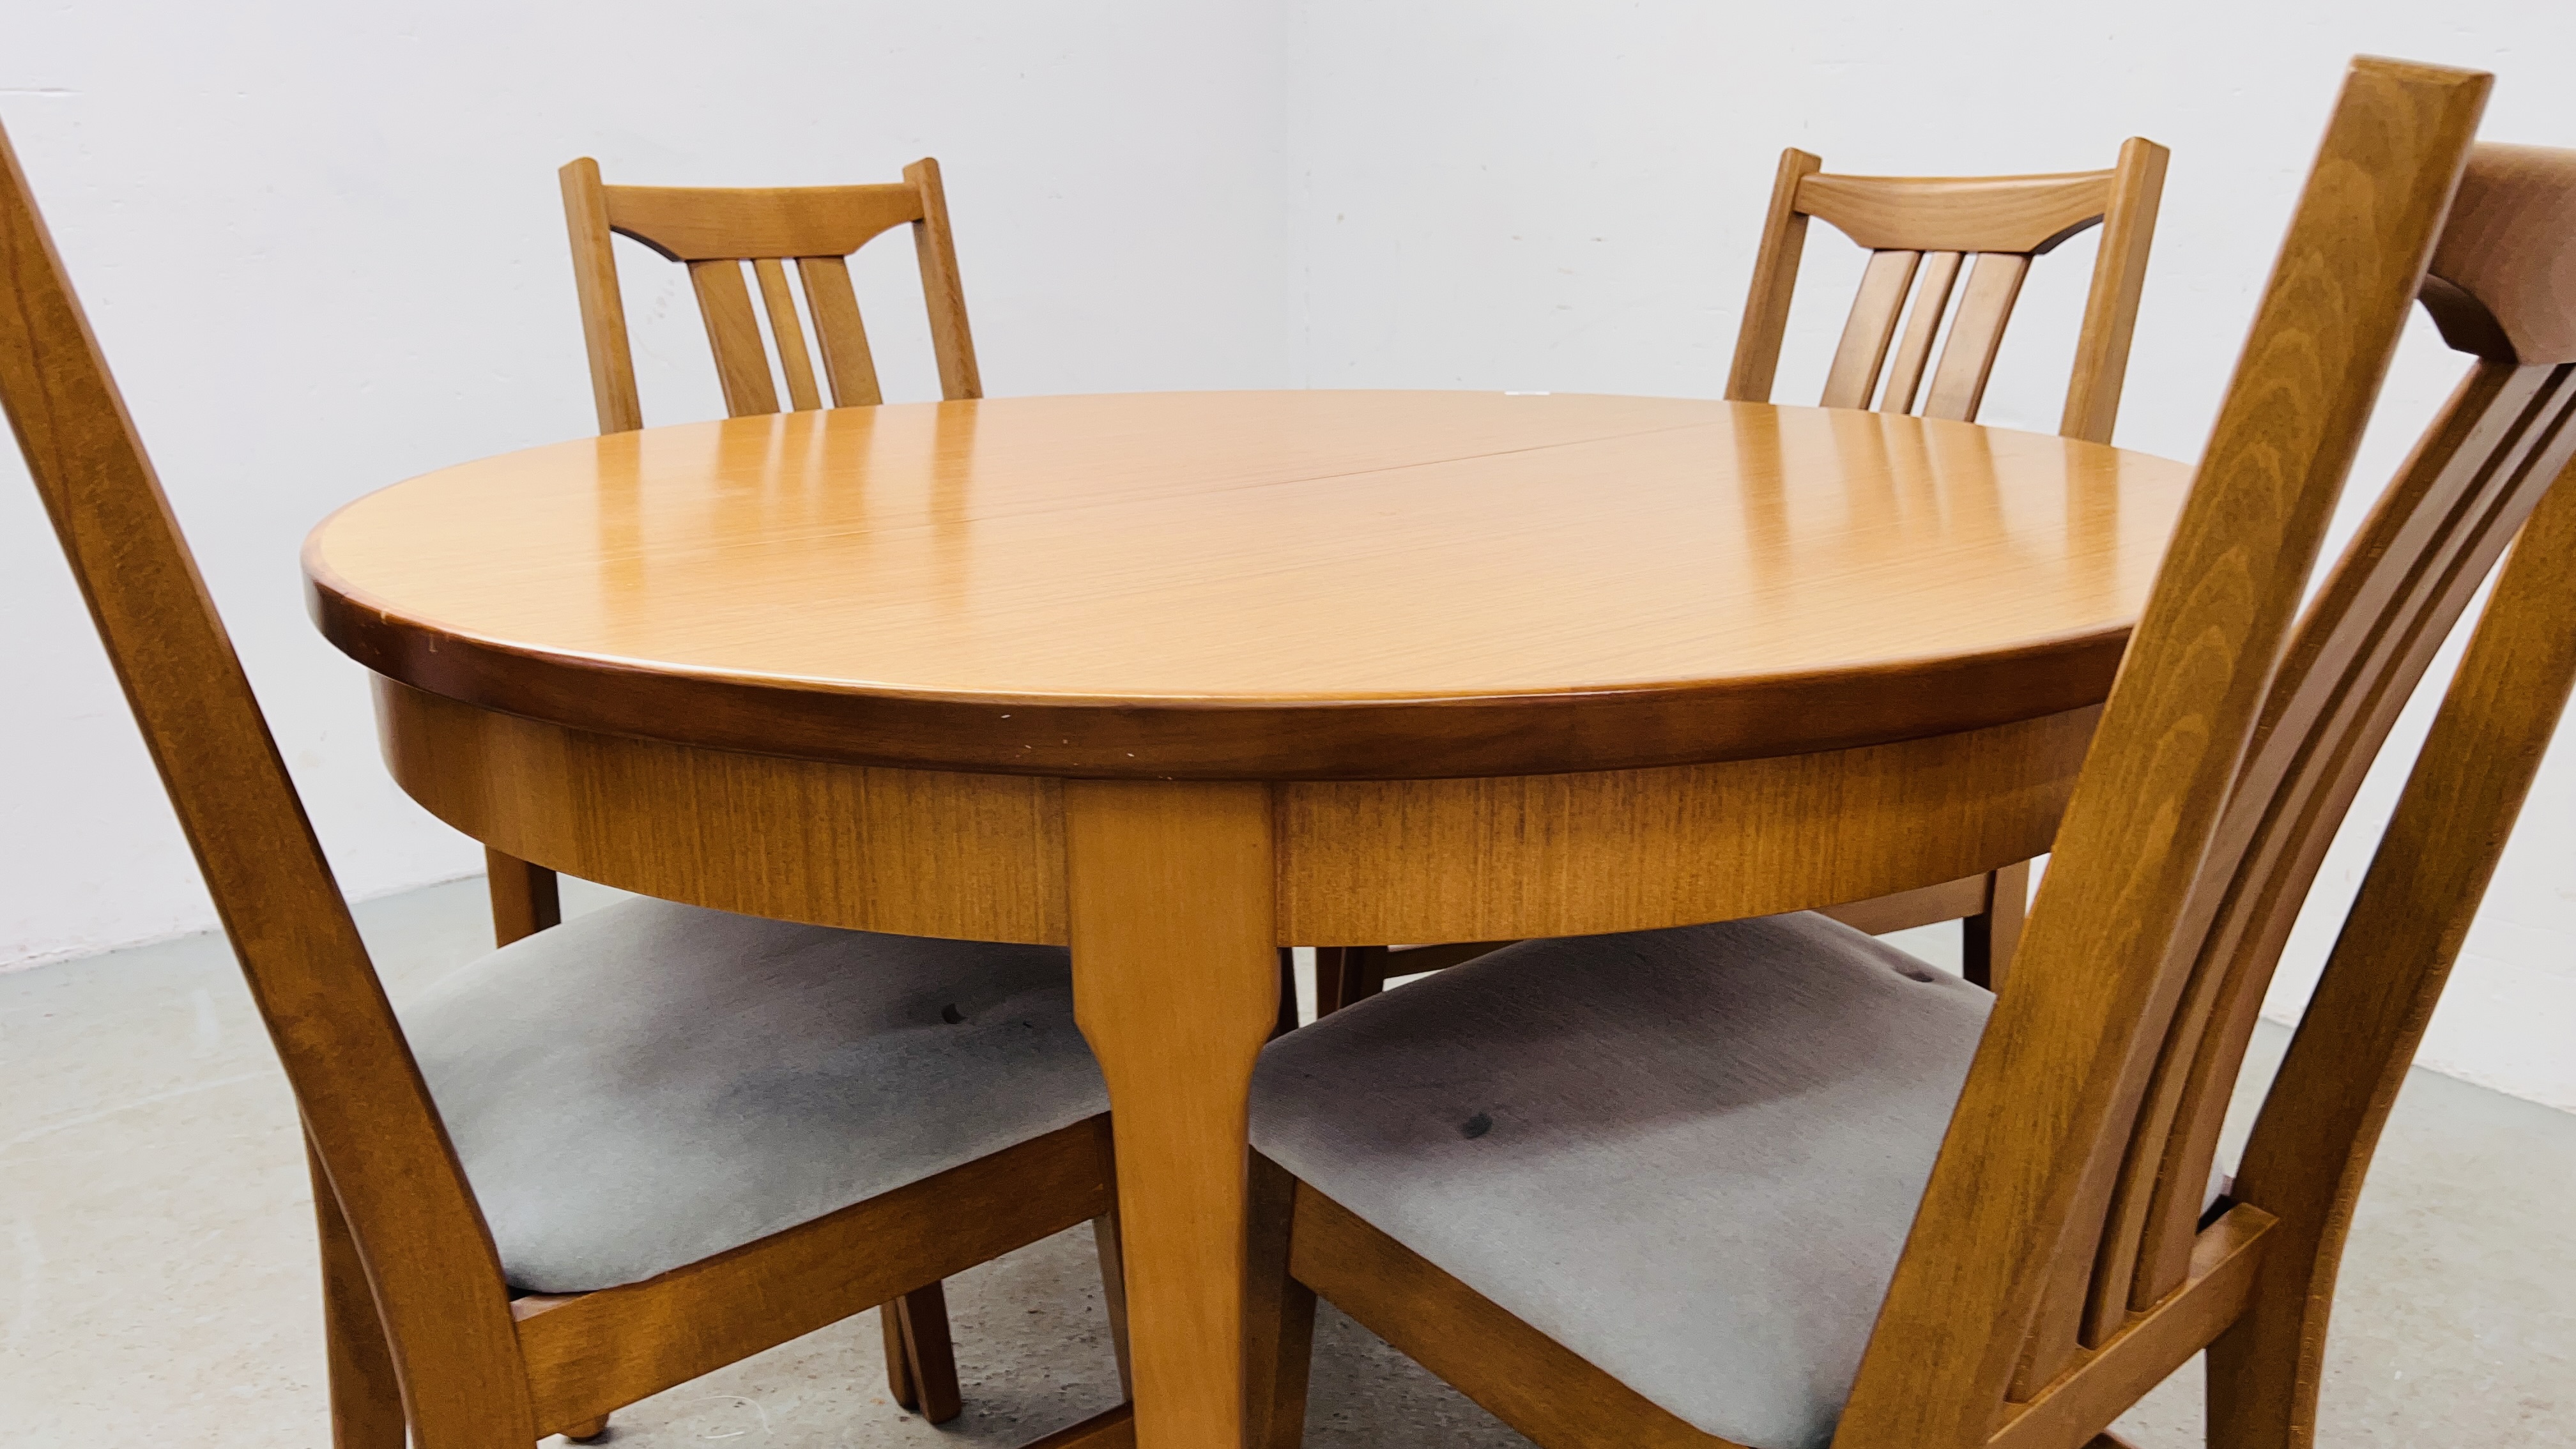 MODERN DINING SET COMPRISING FOUR BEECHWOOD CHAIRS AND EXTENDING CIRCULAR DINING TABLE. - Image 3 of 12